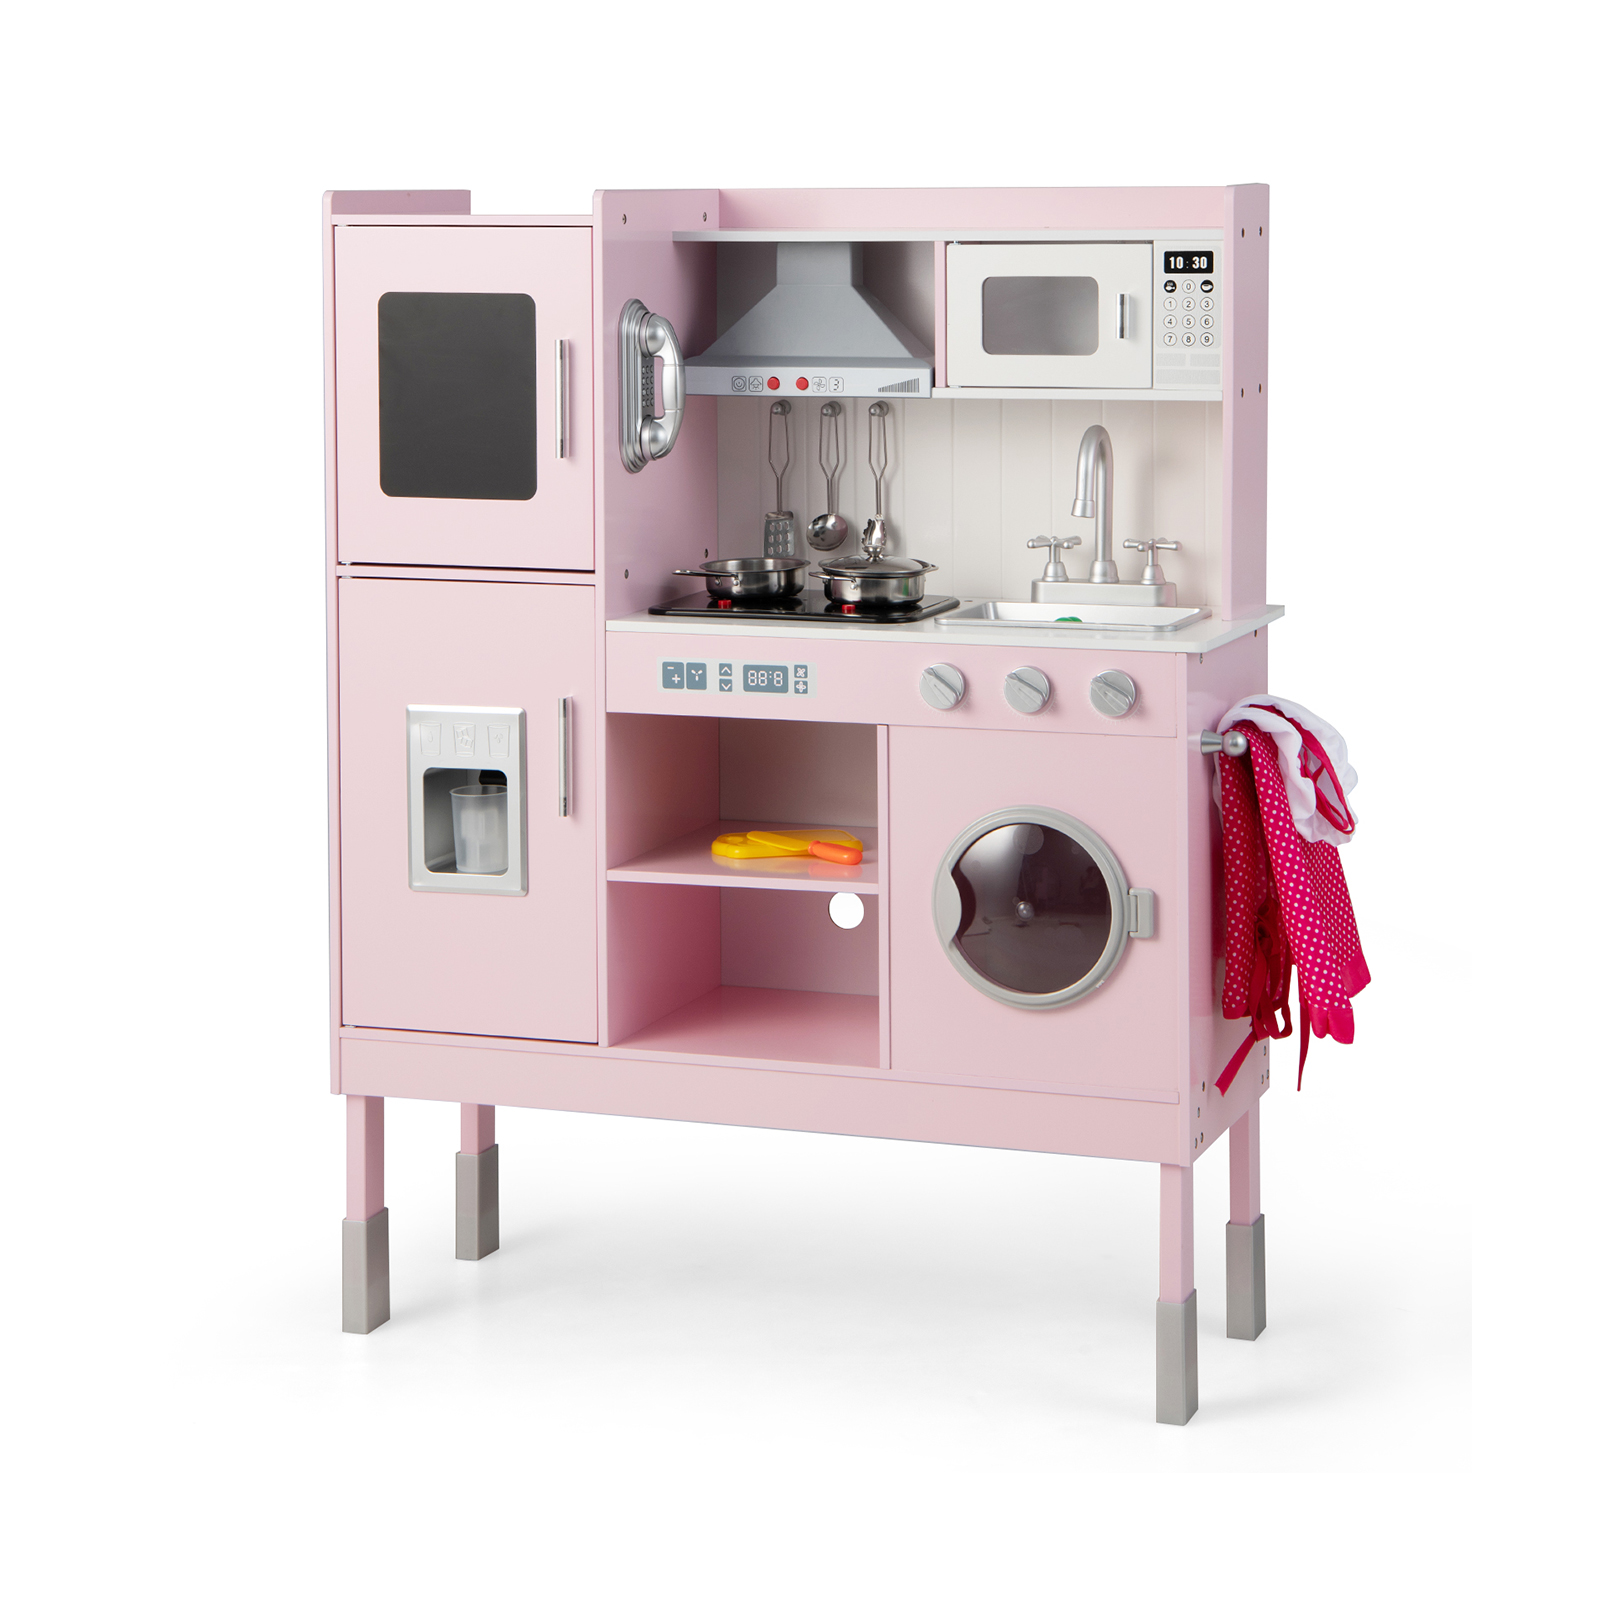 Height_Adjustable_Wooden_Kid_Play_Kitchen_Set_with_Light_and_Ice_Maker_Pink-1.jpg